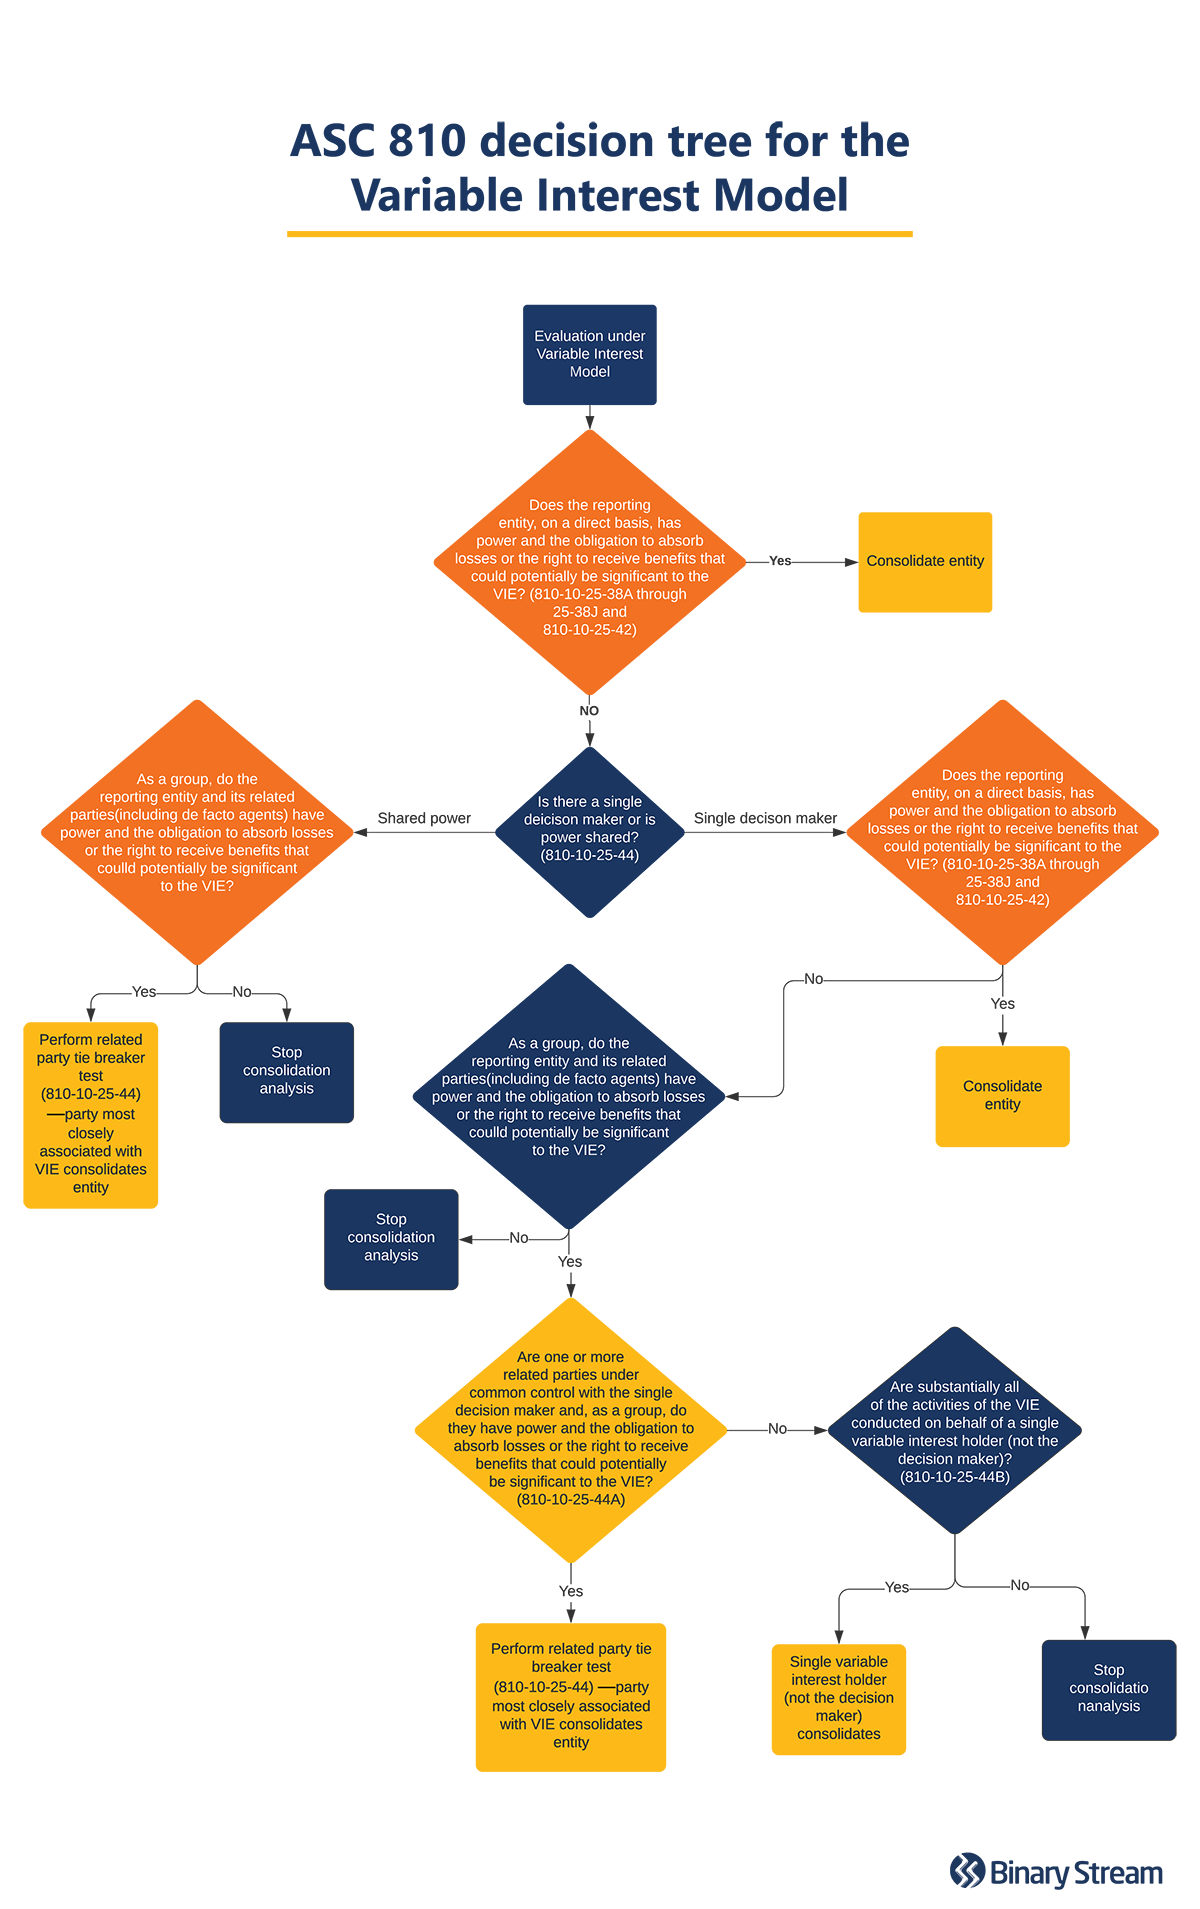 ASC 810 decision tree for the Variable Interest Model 